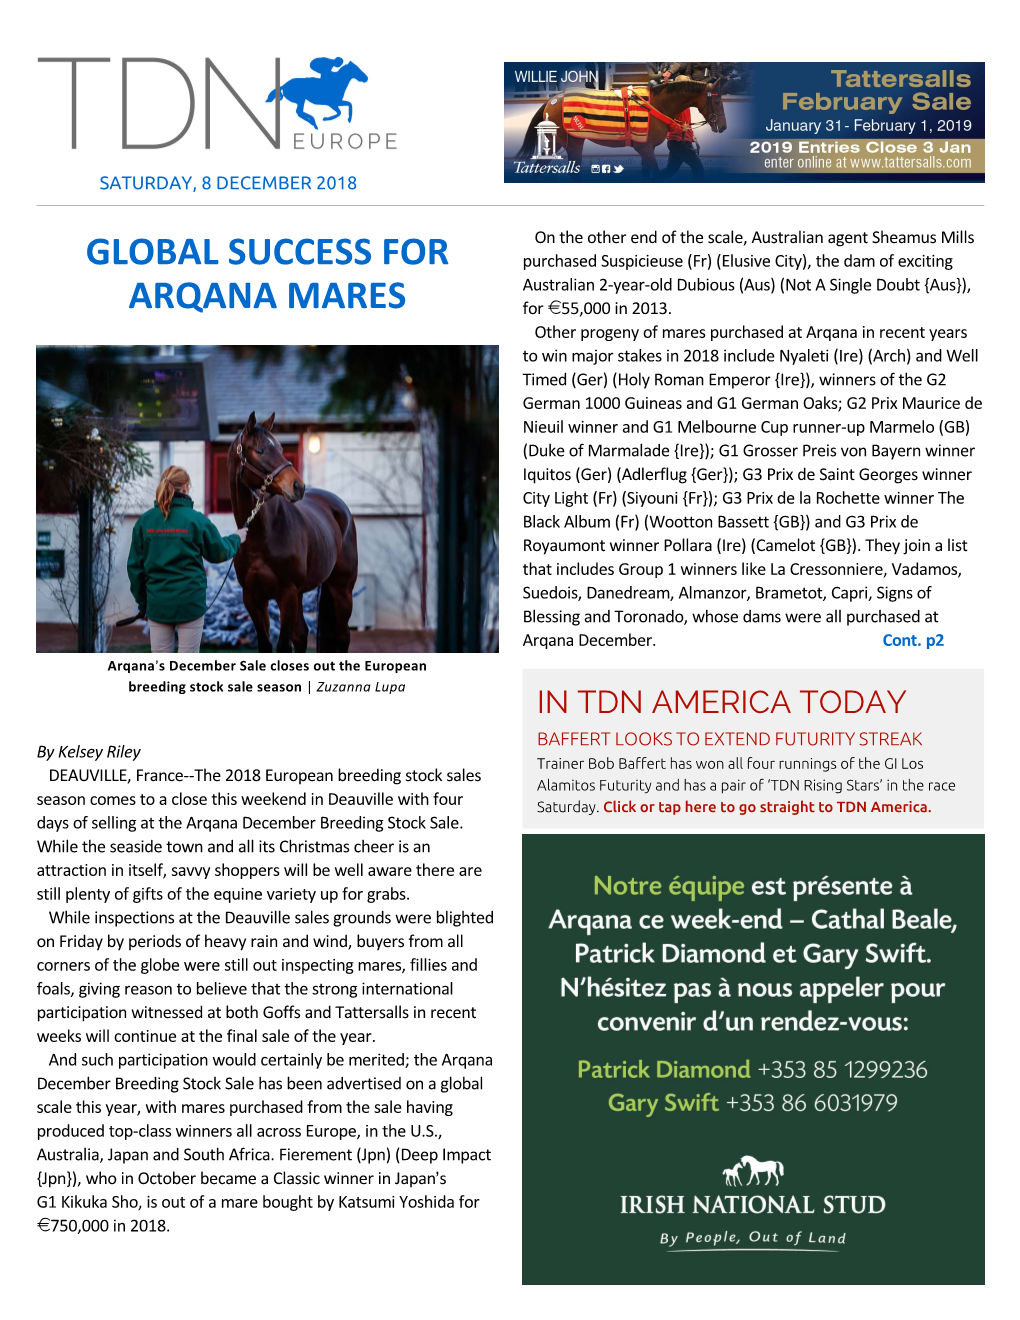 Global Success for Arqana Mares Cont